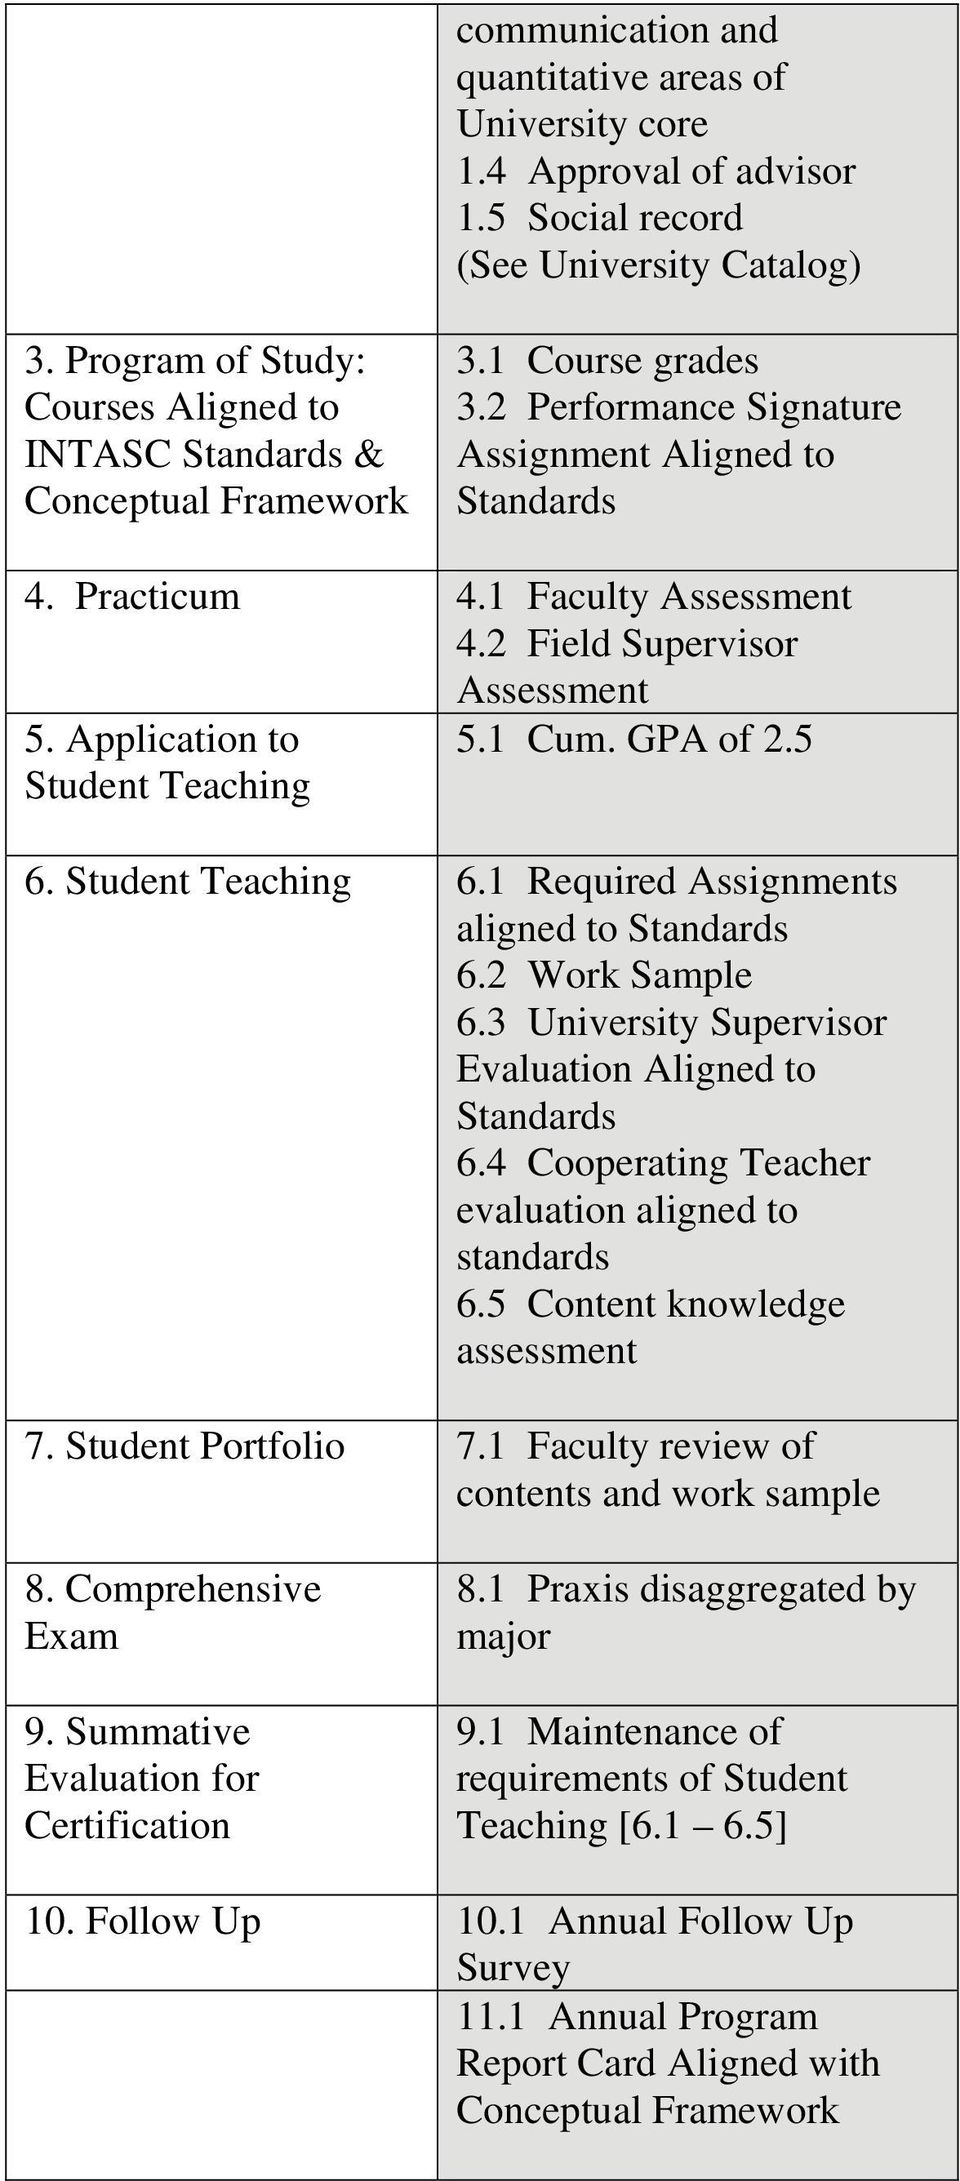 2 Field Supervisor Assessment 5. Application to 5.1 Cum. GPA of 2.5 Student Teaching 6. Student Teaching 6.1 Required Assignments aligned to Standards 6.2 Work Sample 6.